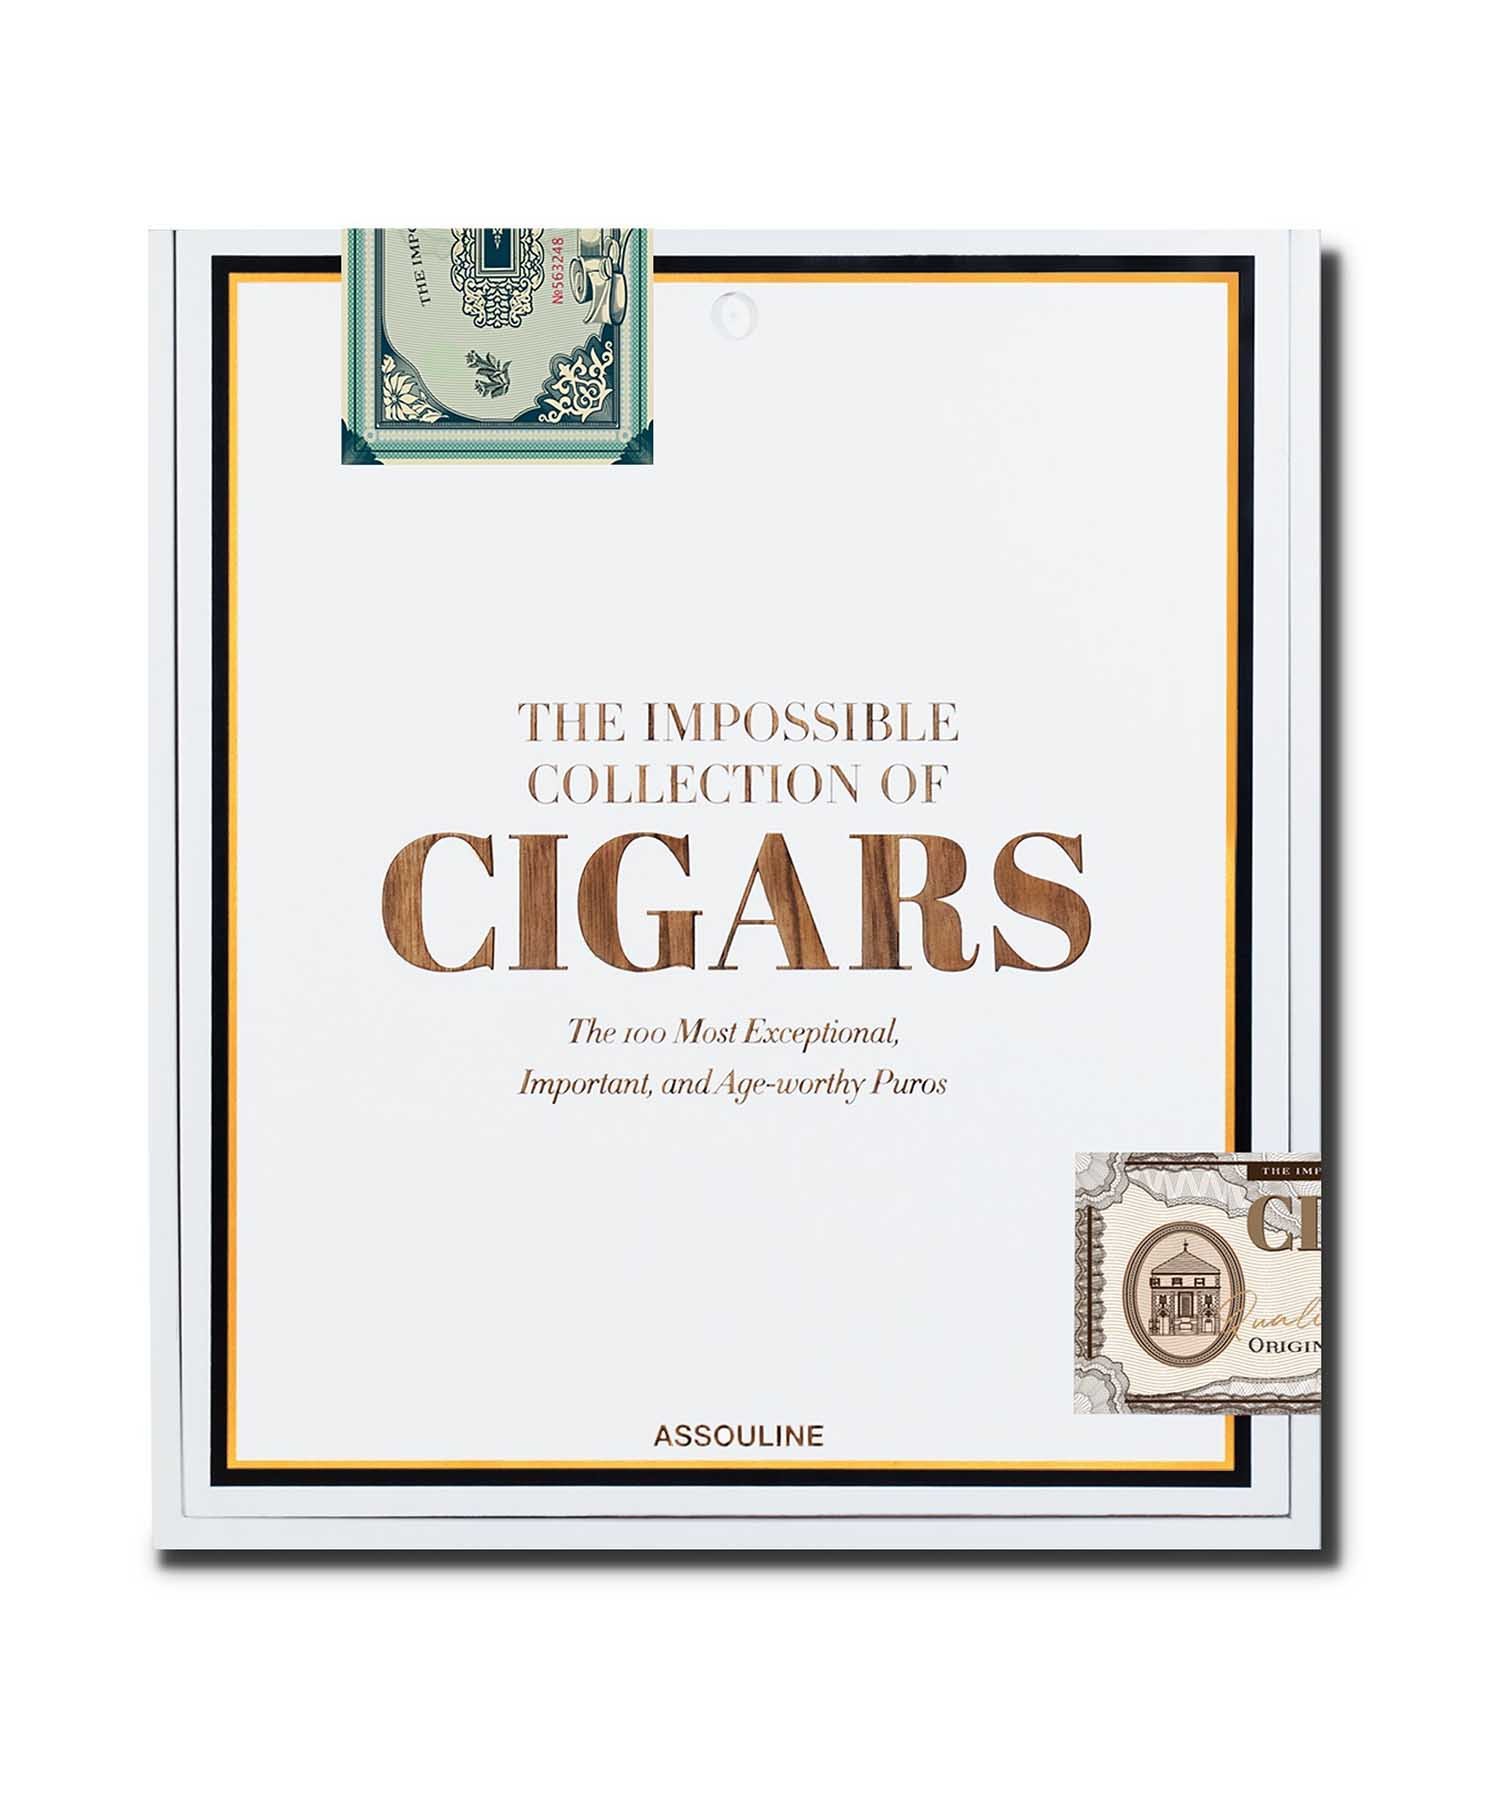 Hier sehen Sie: Bildband The Impossible Collection of Cigars%byManufacturer%